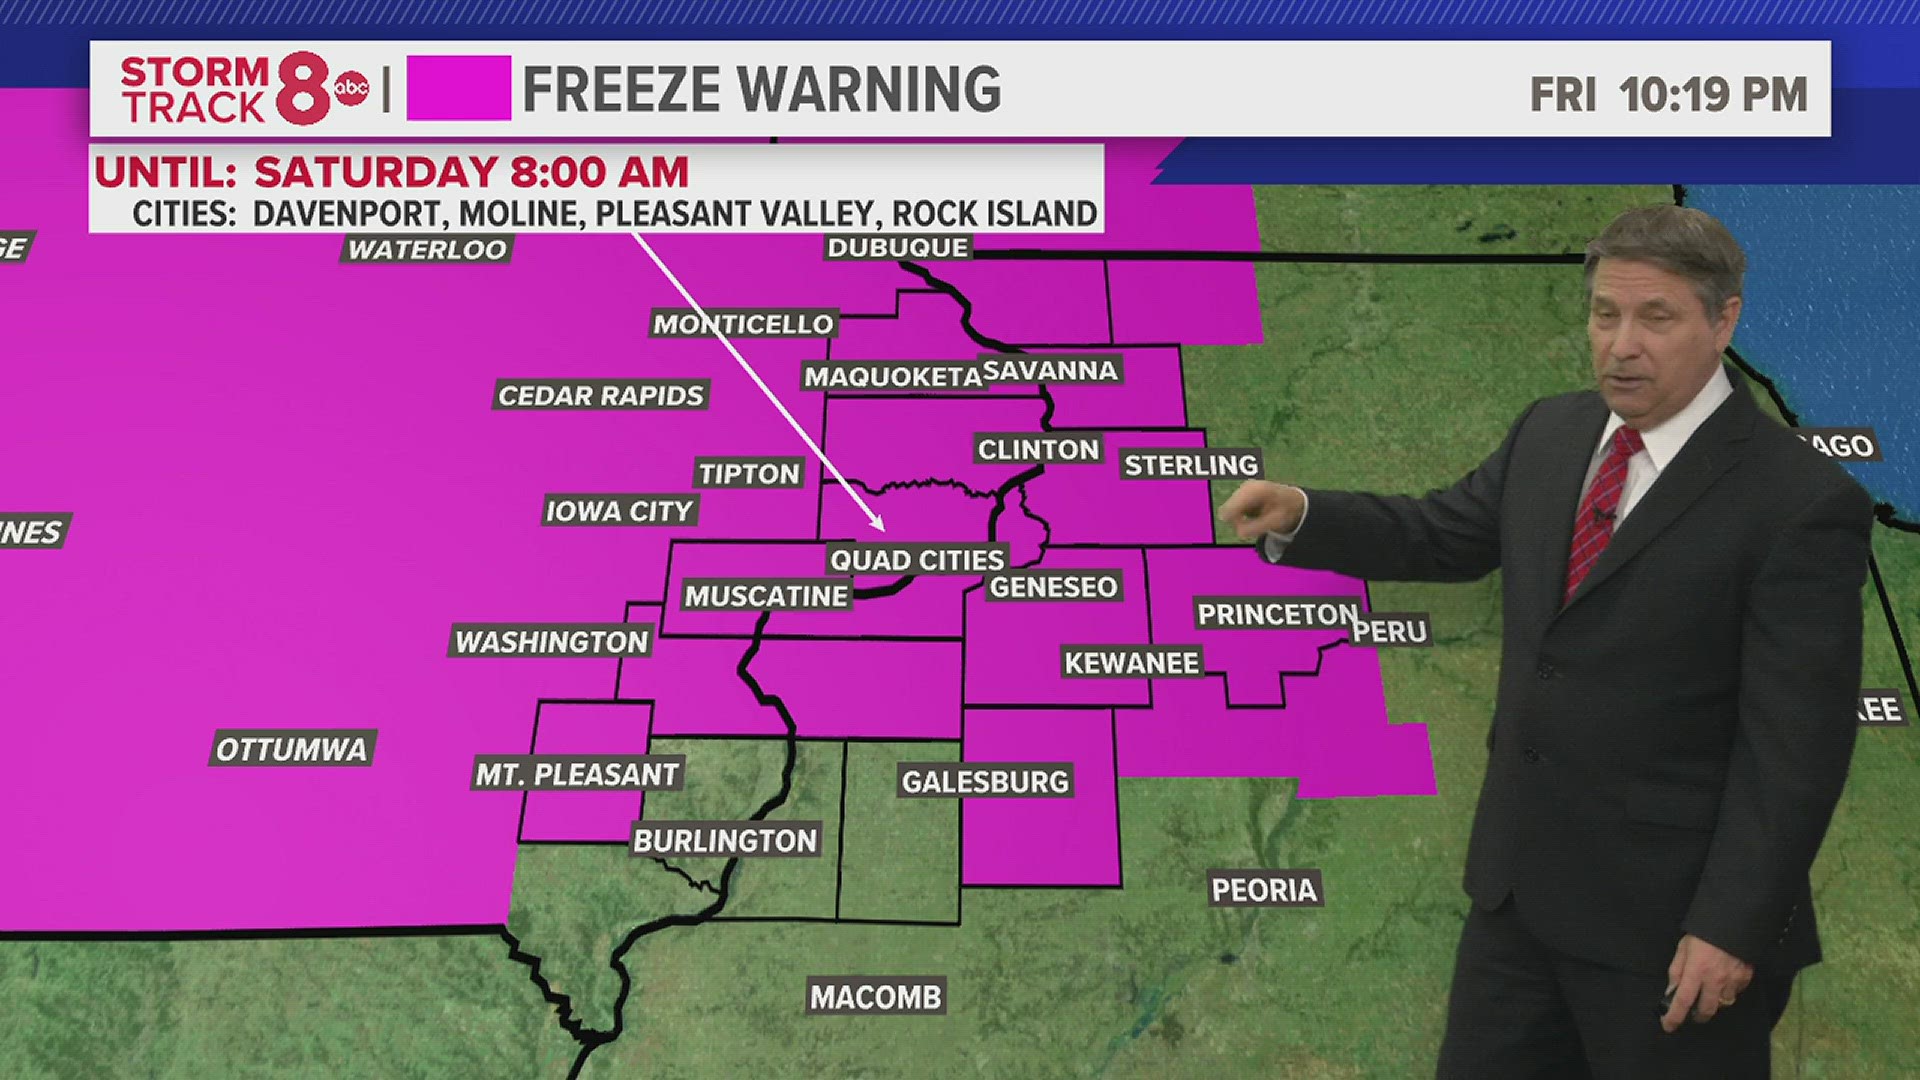 Freeze Warning for most of the area overnight